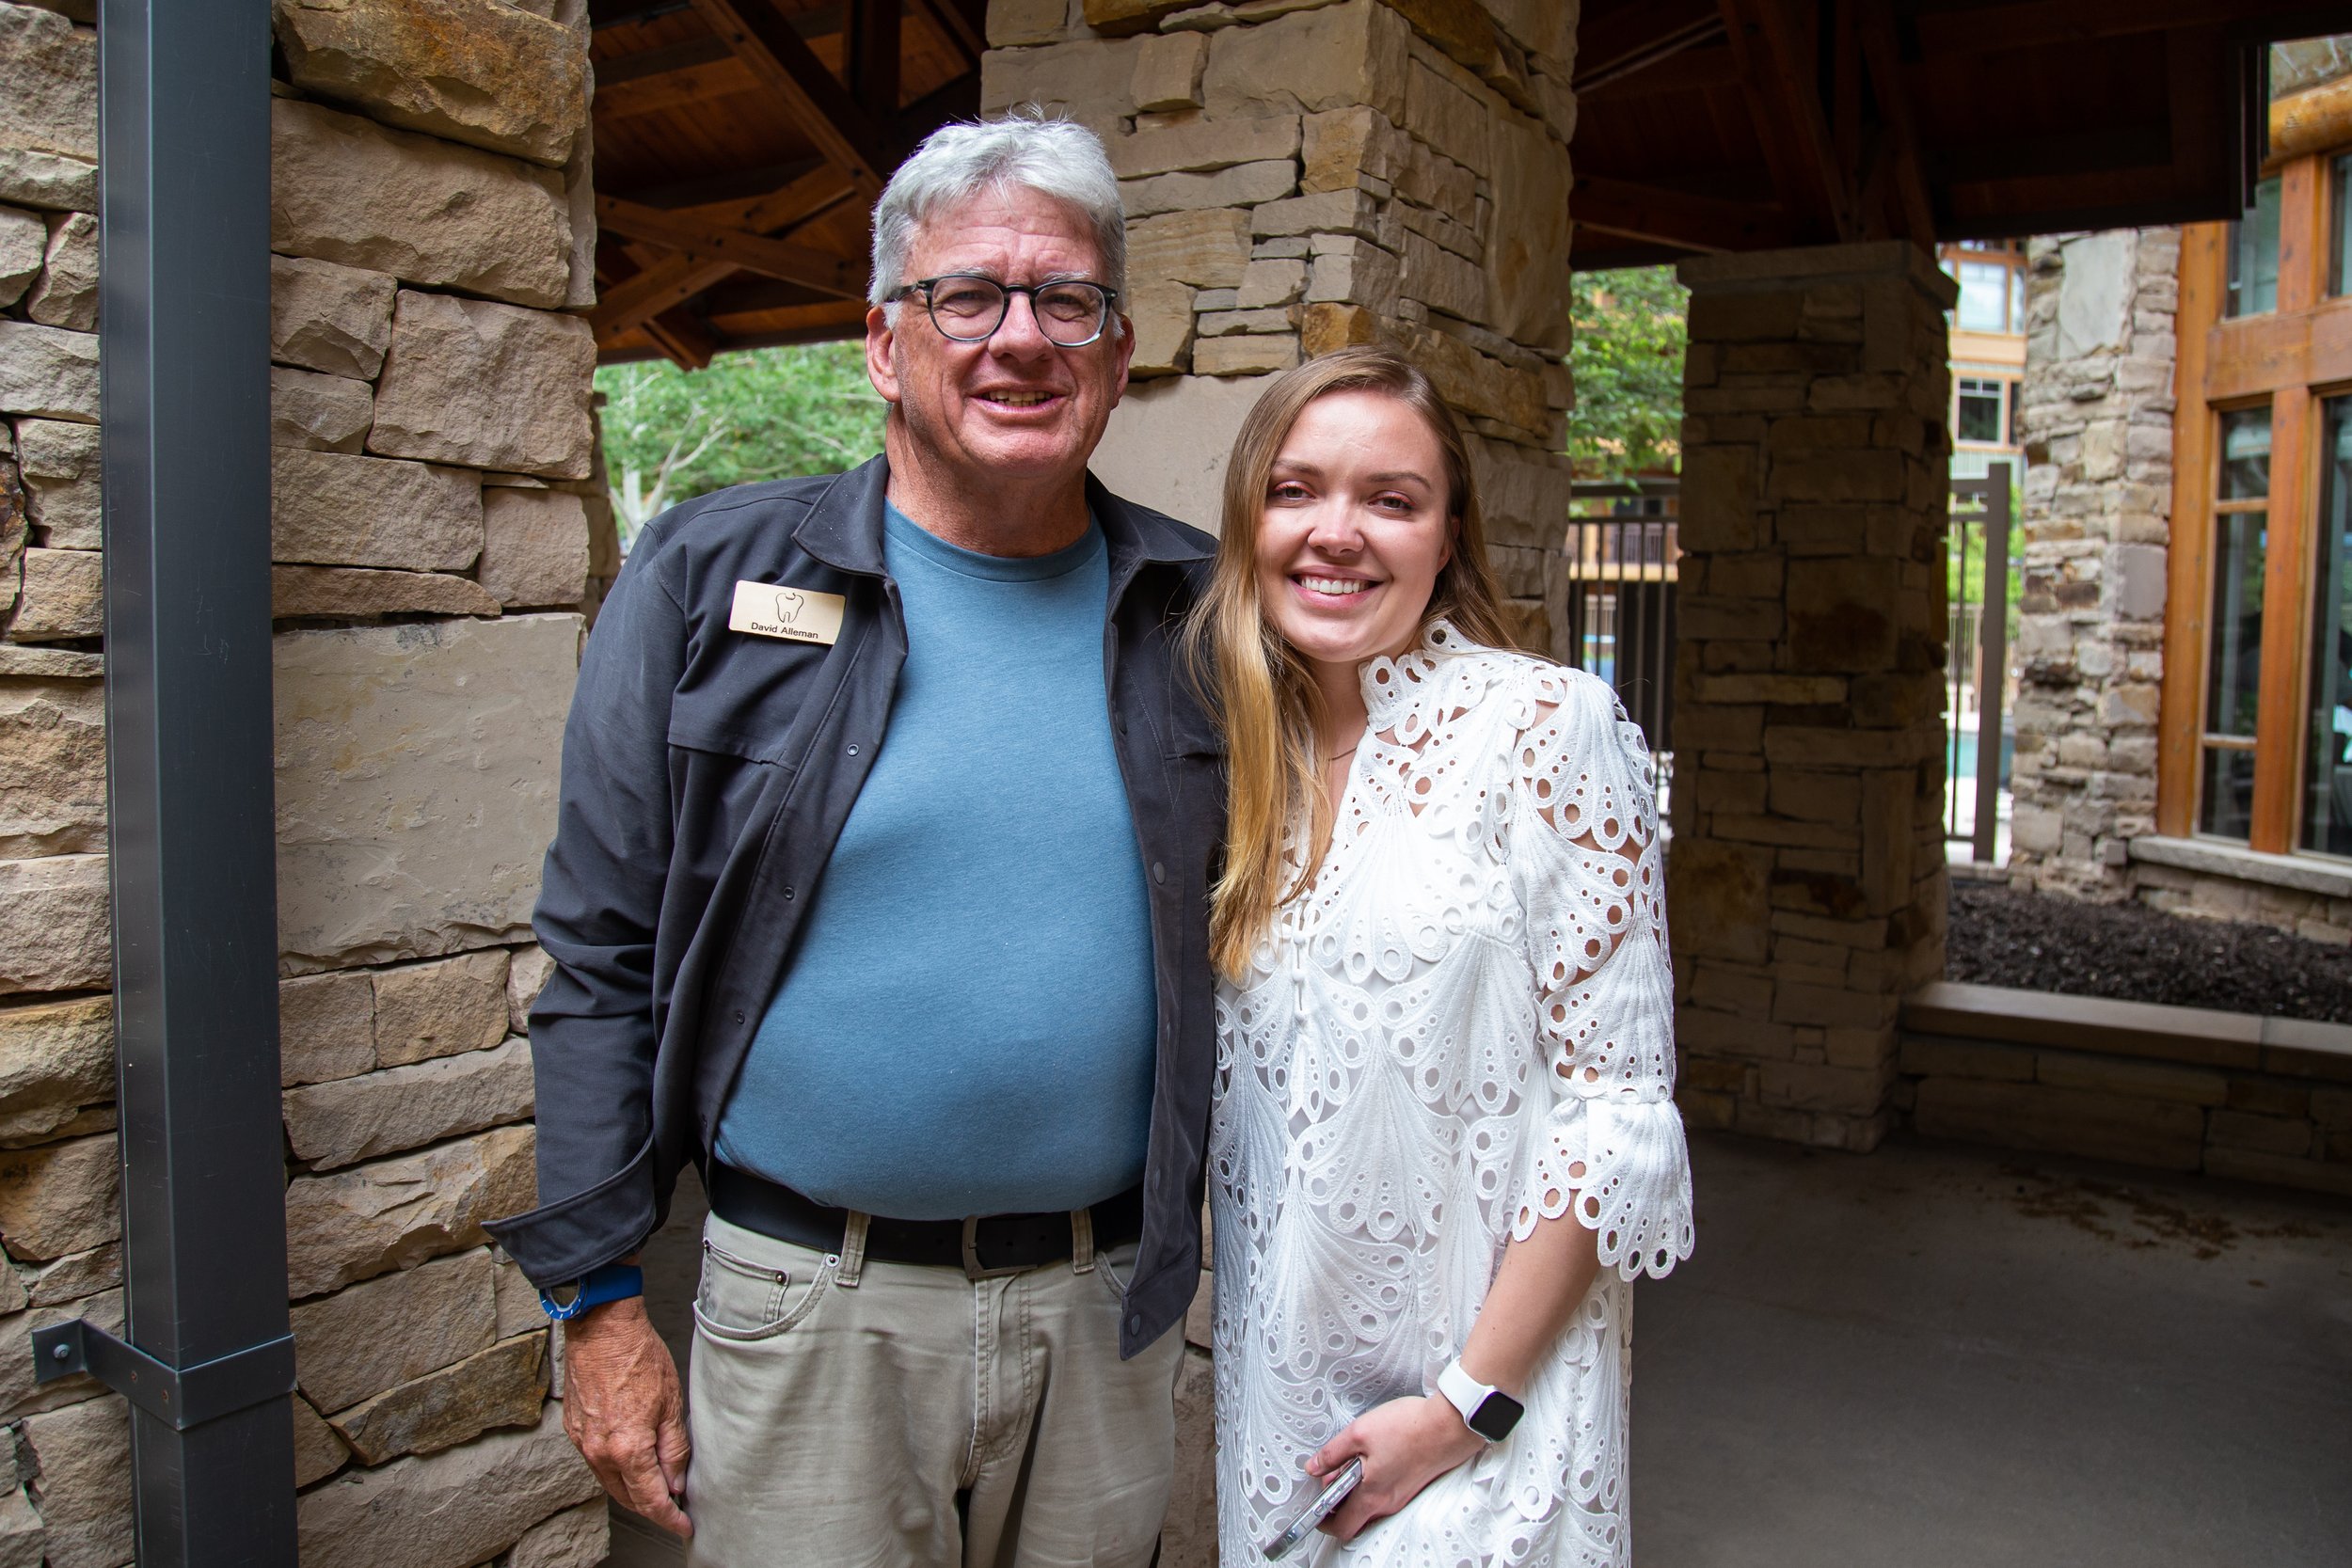 Drs. Alleman and Kolisnyk at the Alleman Center 2022 Retreat 2.jpg